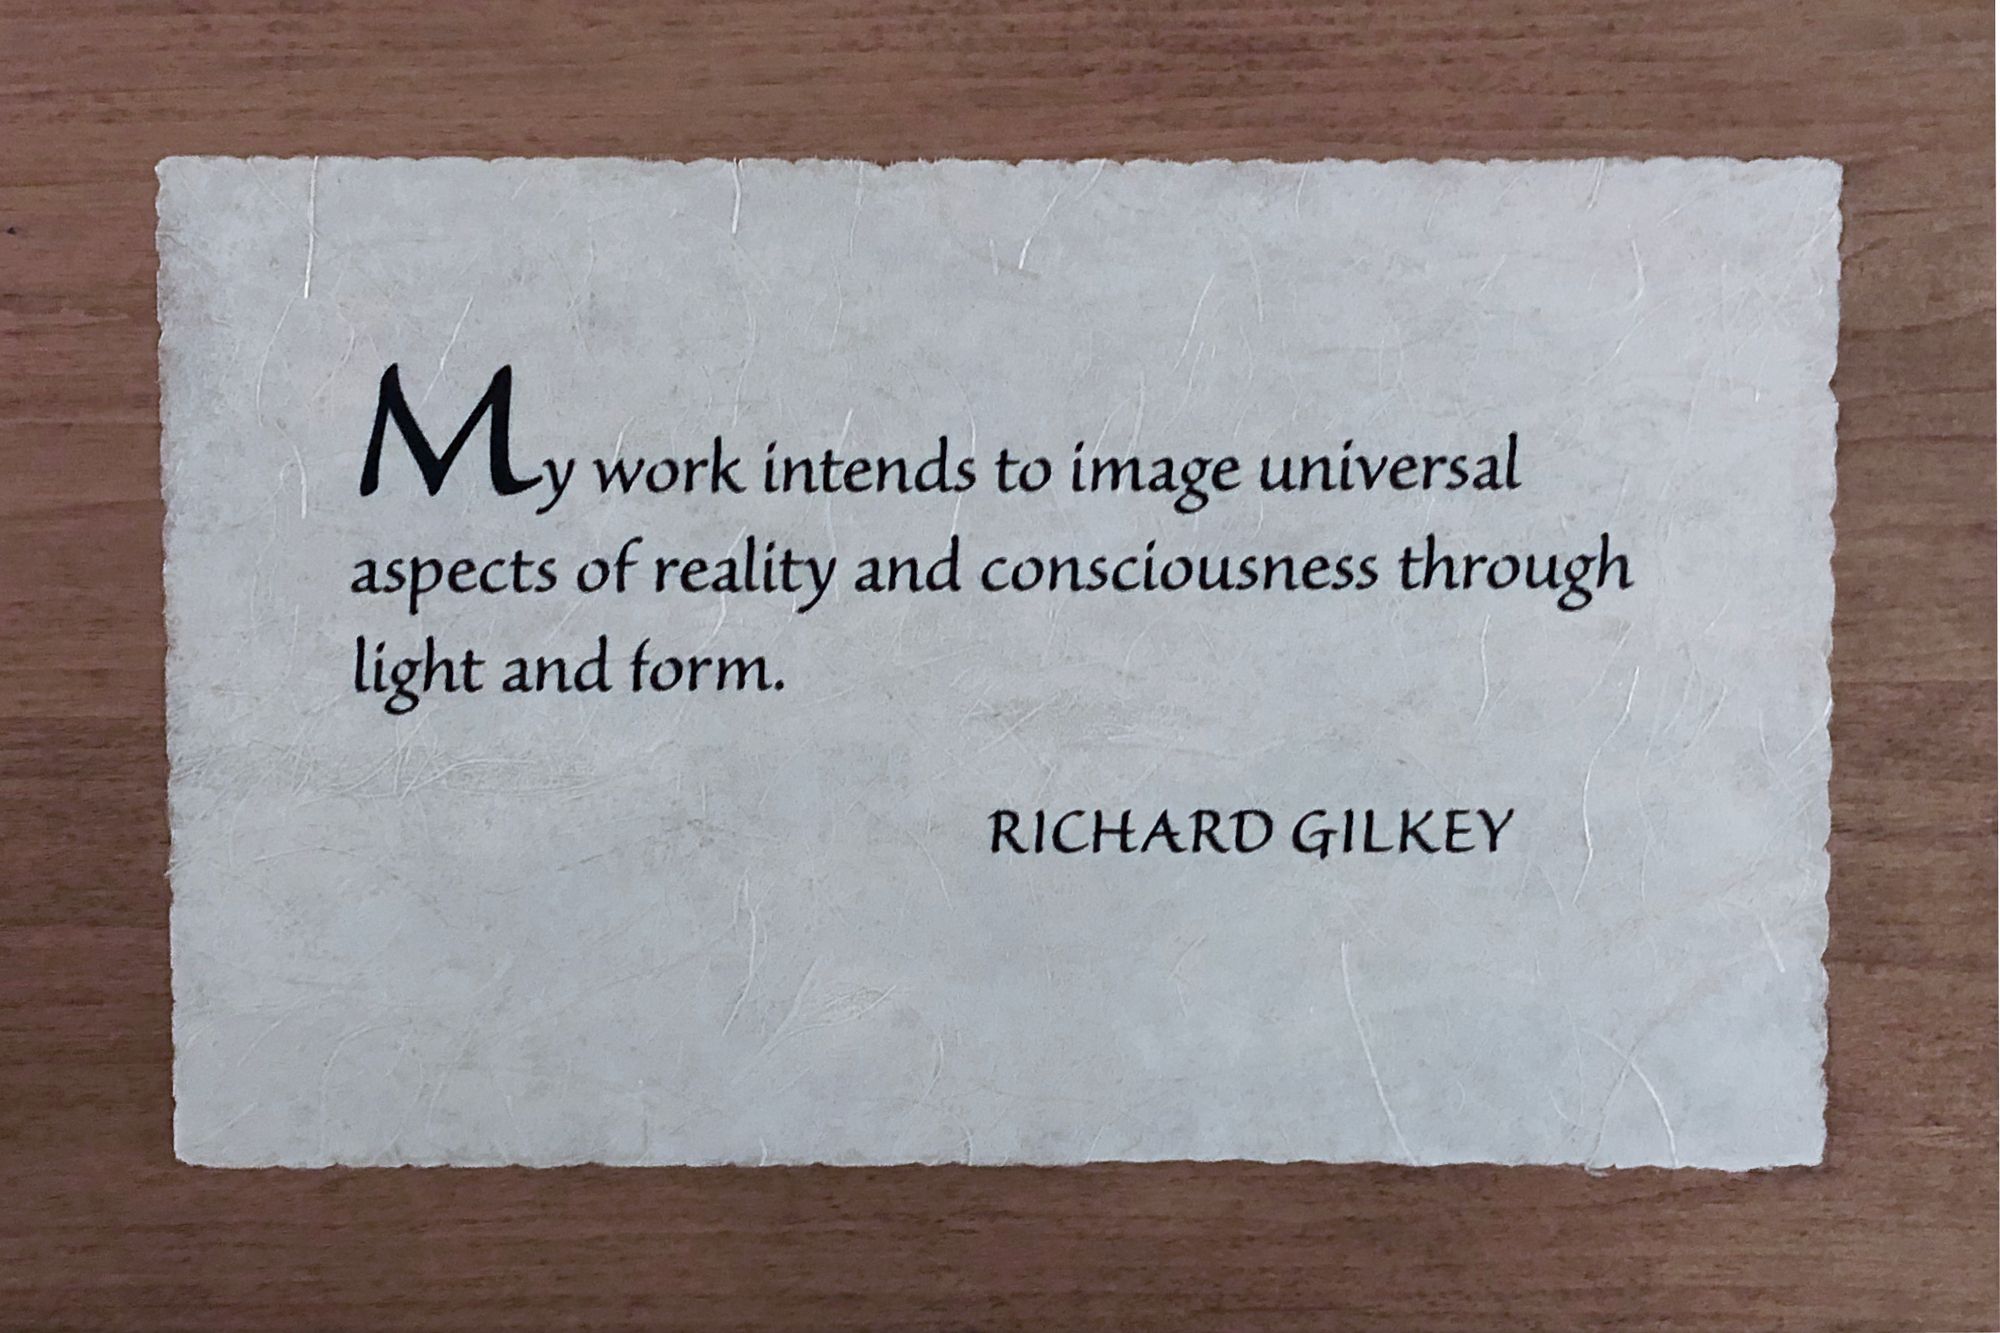 Photo of wooden plaque with Richard Gilkey quote: “My work intends to image universal aspects of reality and consciousness through light and form.”